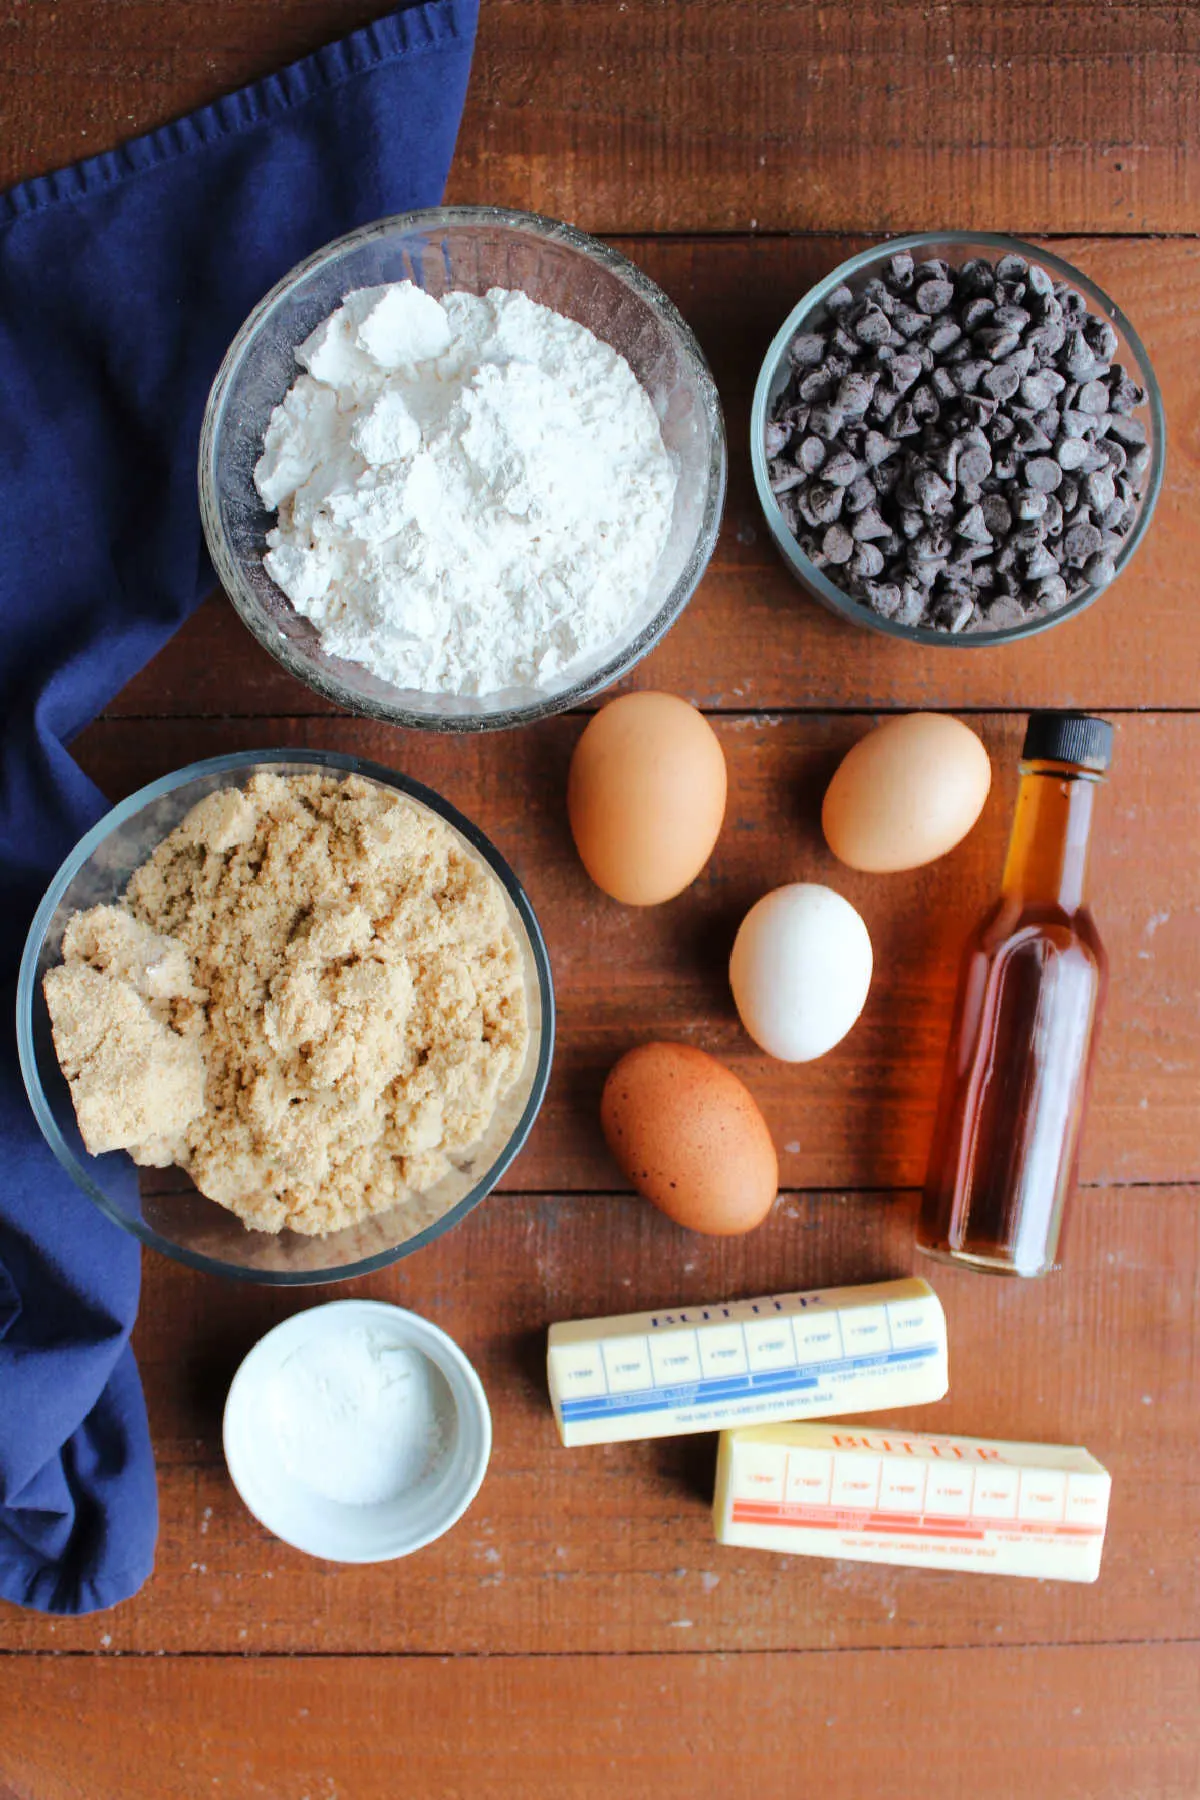 Ingredients including brown sugar, flour, chocolate chips, eggs, vanilla, butter, baking powder, and salt.